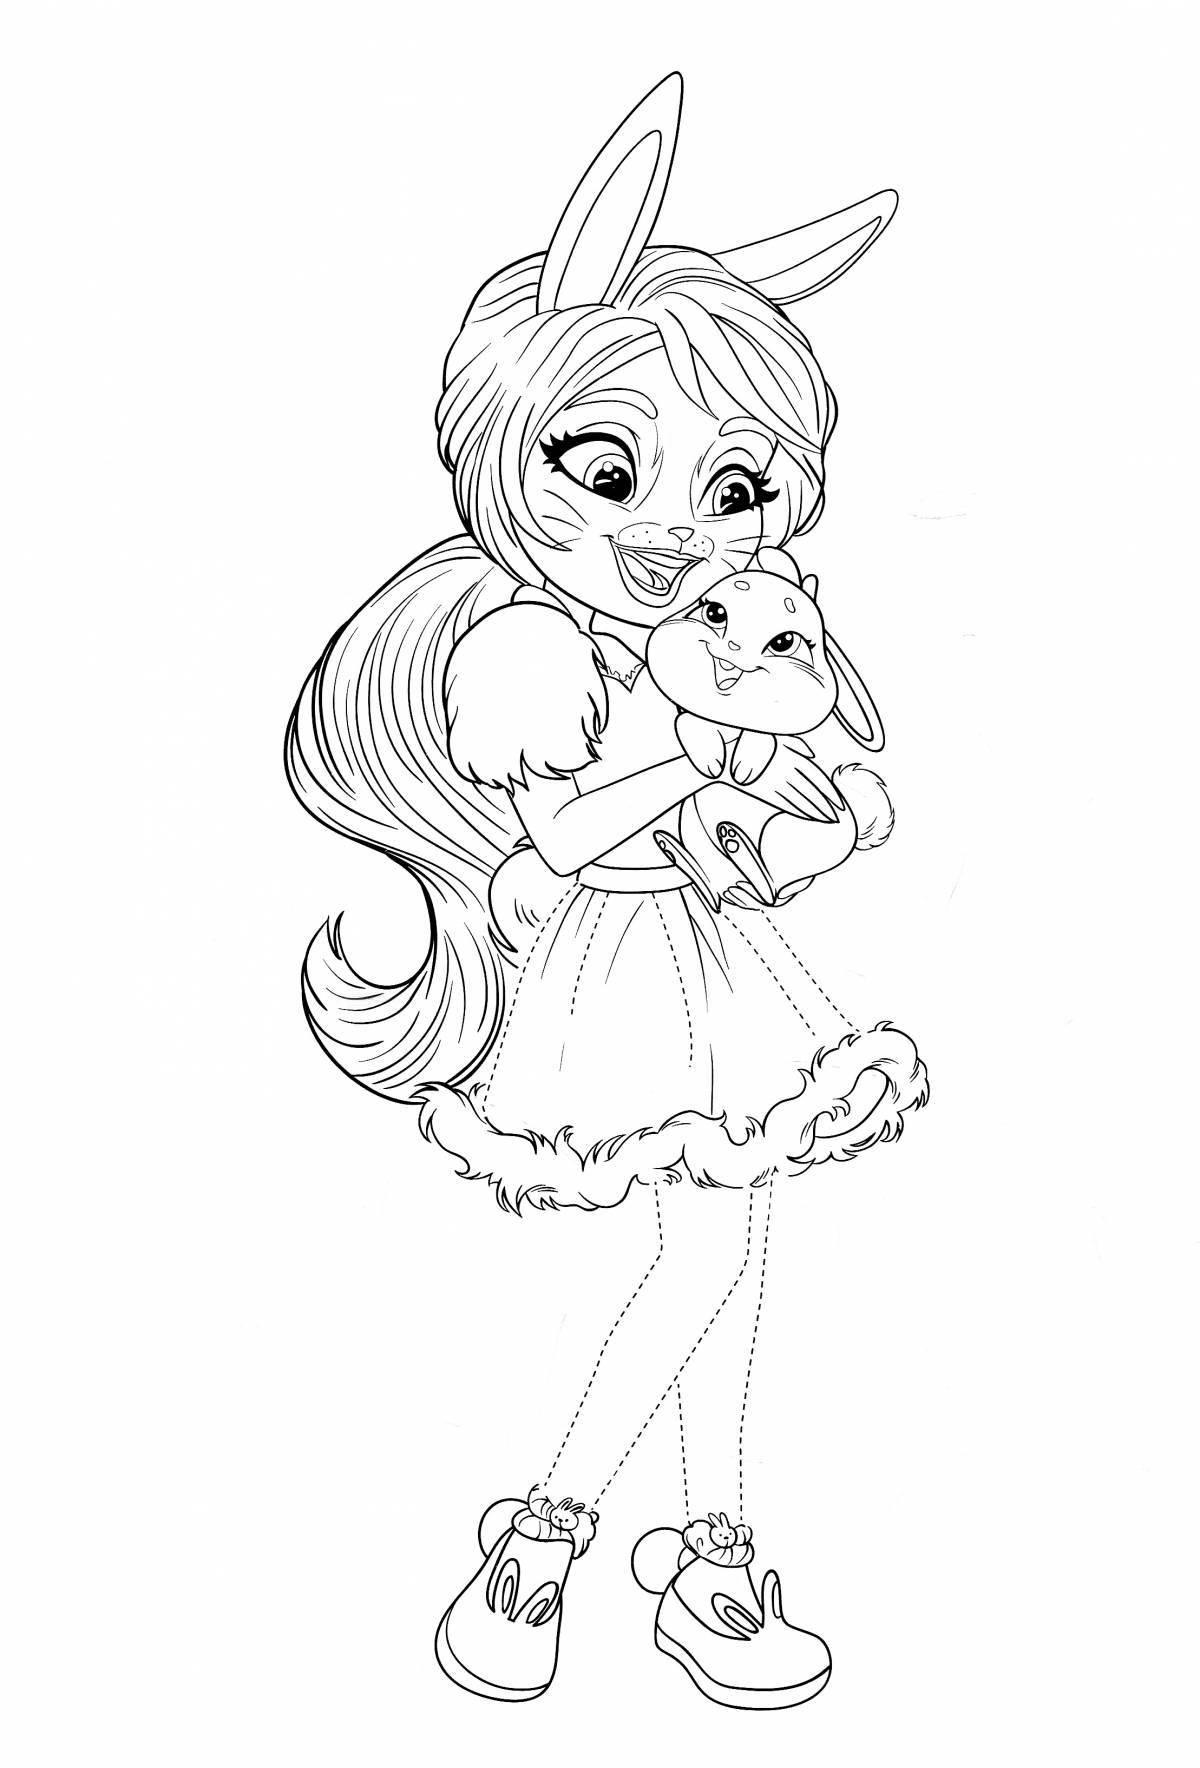 Adorable enchantimals and pets coloring page